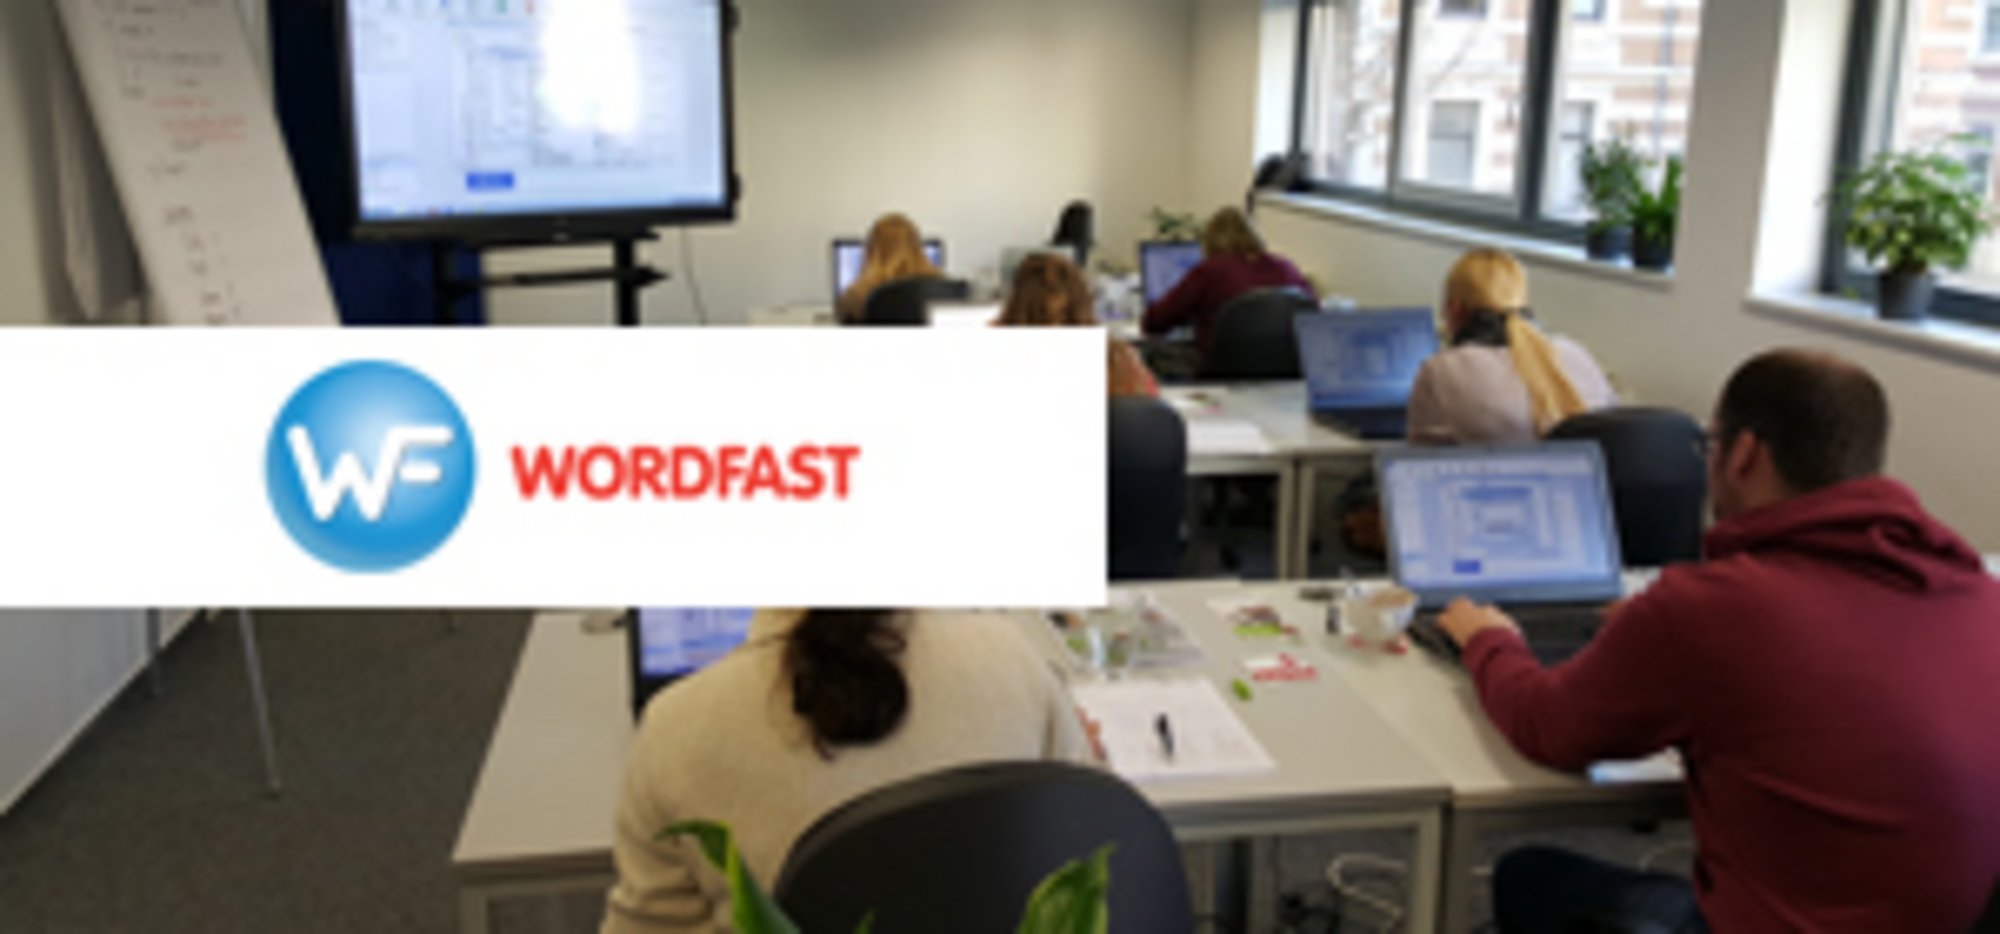 Loctimize Schulung Wordfast